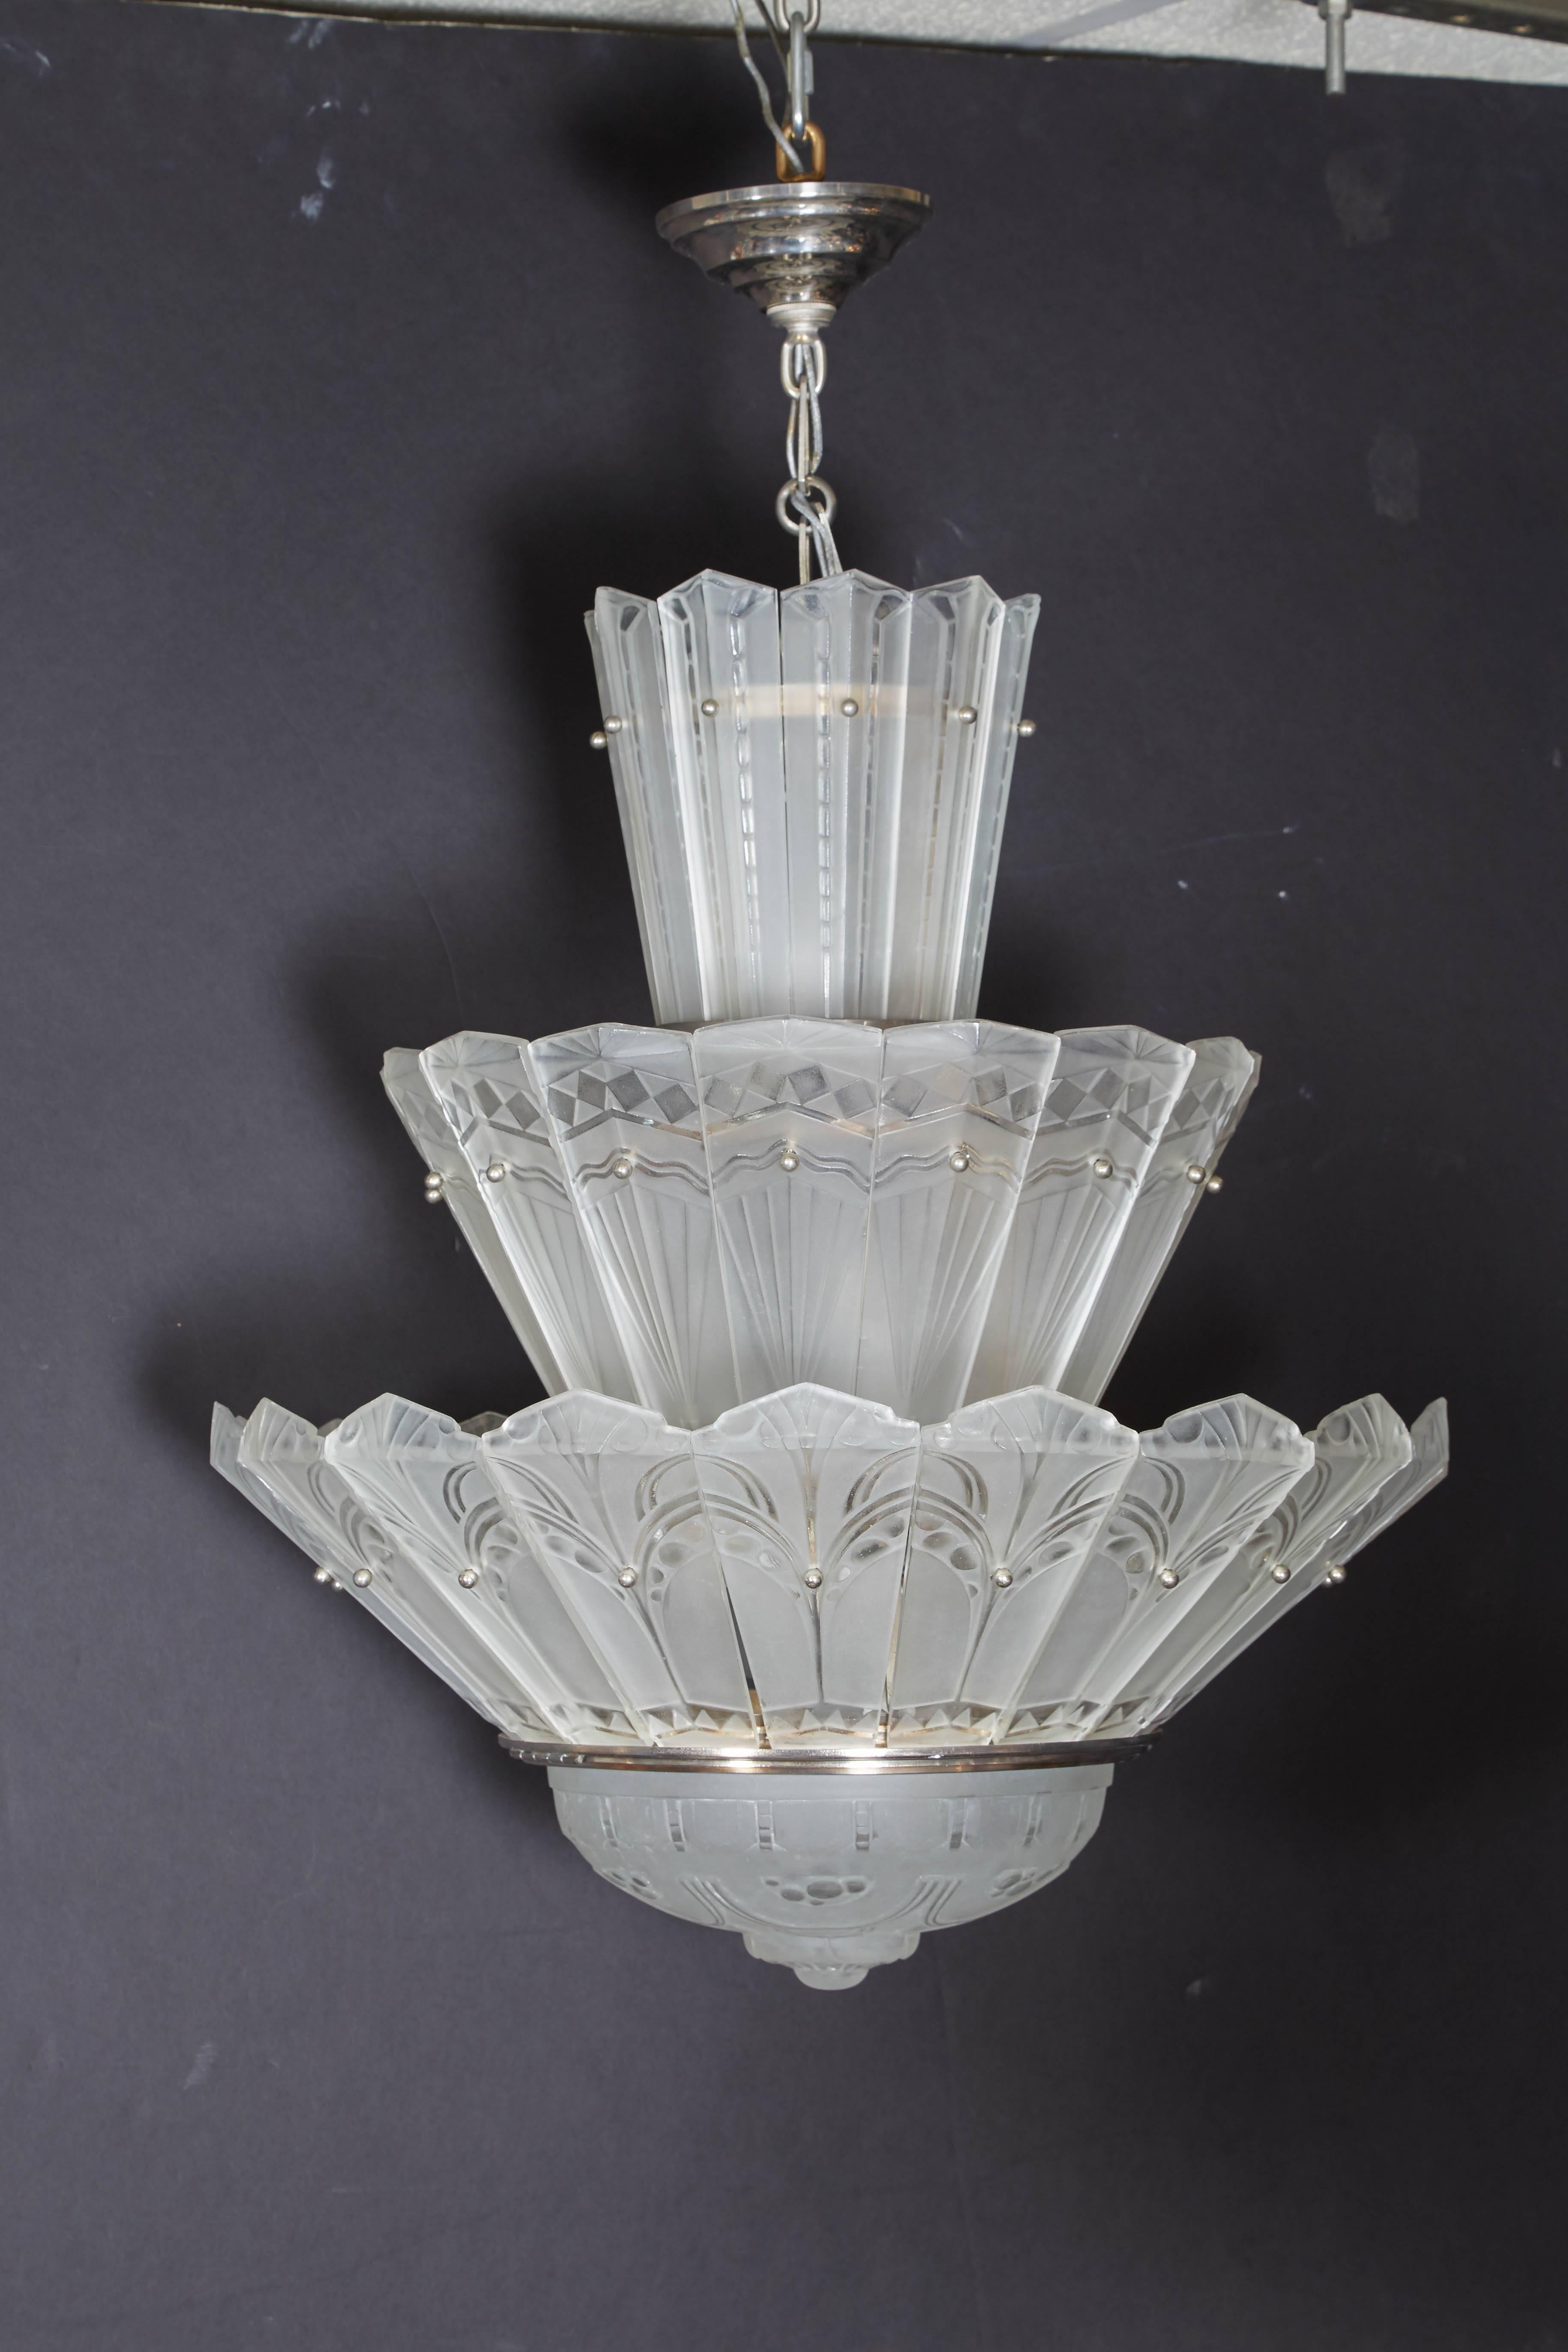 Rare Original French Art Deco Tiered Sabino Chandelier In Good Condition For Sale In New York City, NY